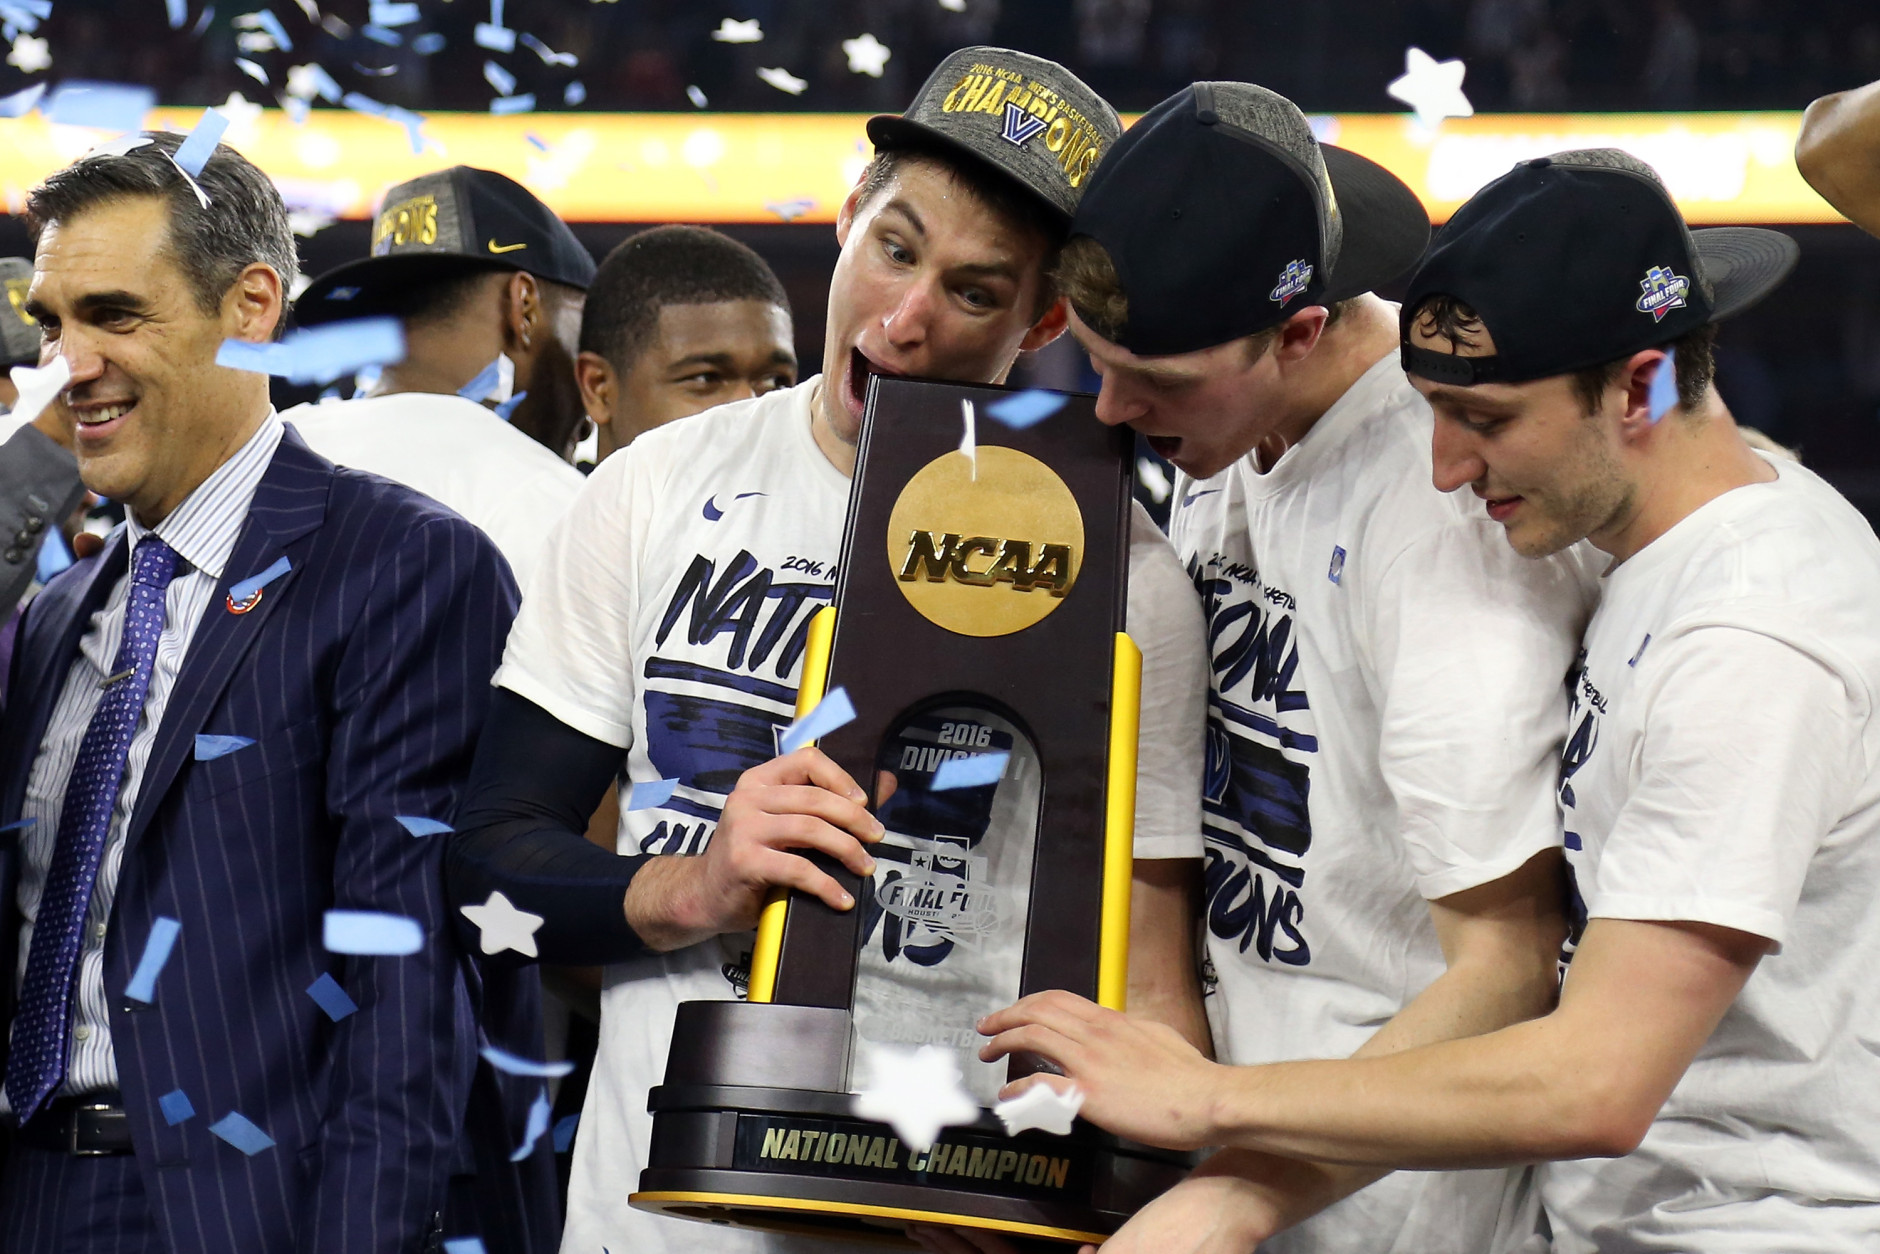 Ryan Arcidiacono #15 of the Villanova Wildcats (L) celebrates with the trophy after defeating the North Carolina Tar Heels 77-74 to win the 2016 NCAA Men's Final Four National Championship game at NRG Stadium on April 4, 2016 in Houston, Texas.  (Photo by Streeter Lecka/Getty Images)